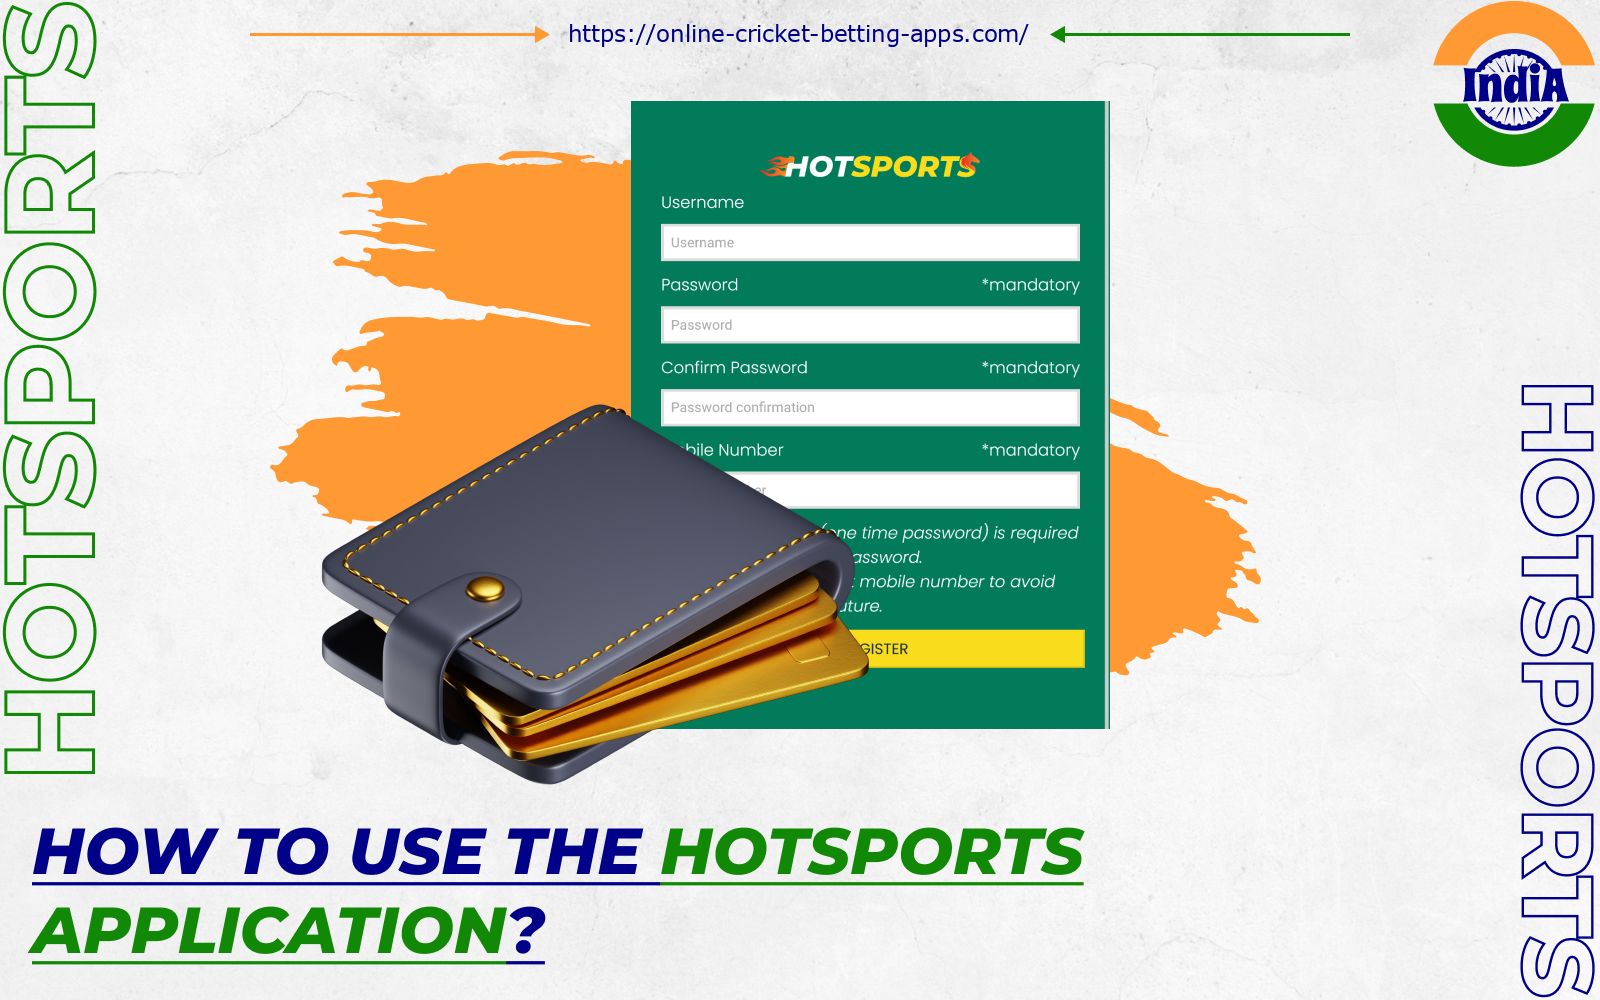 To start betting on the Hotsports app, players from India need to register and make a deposit